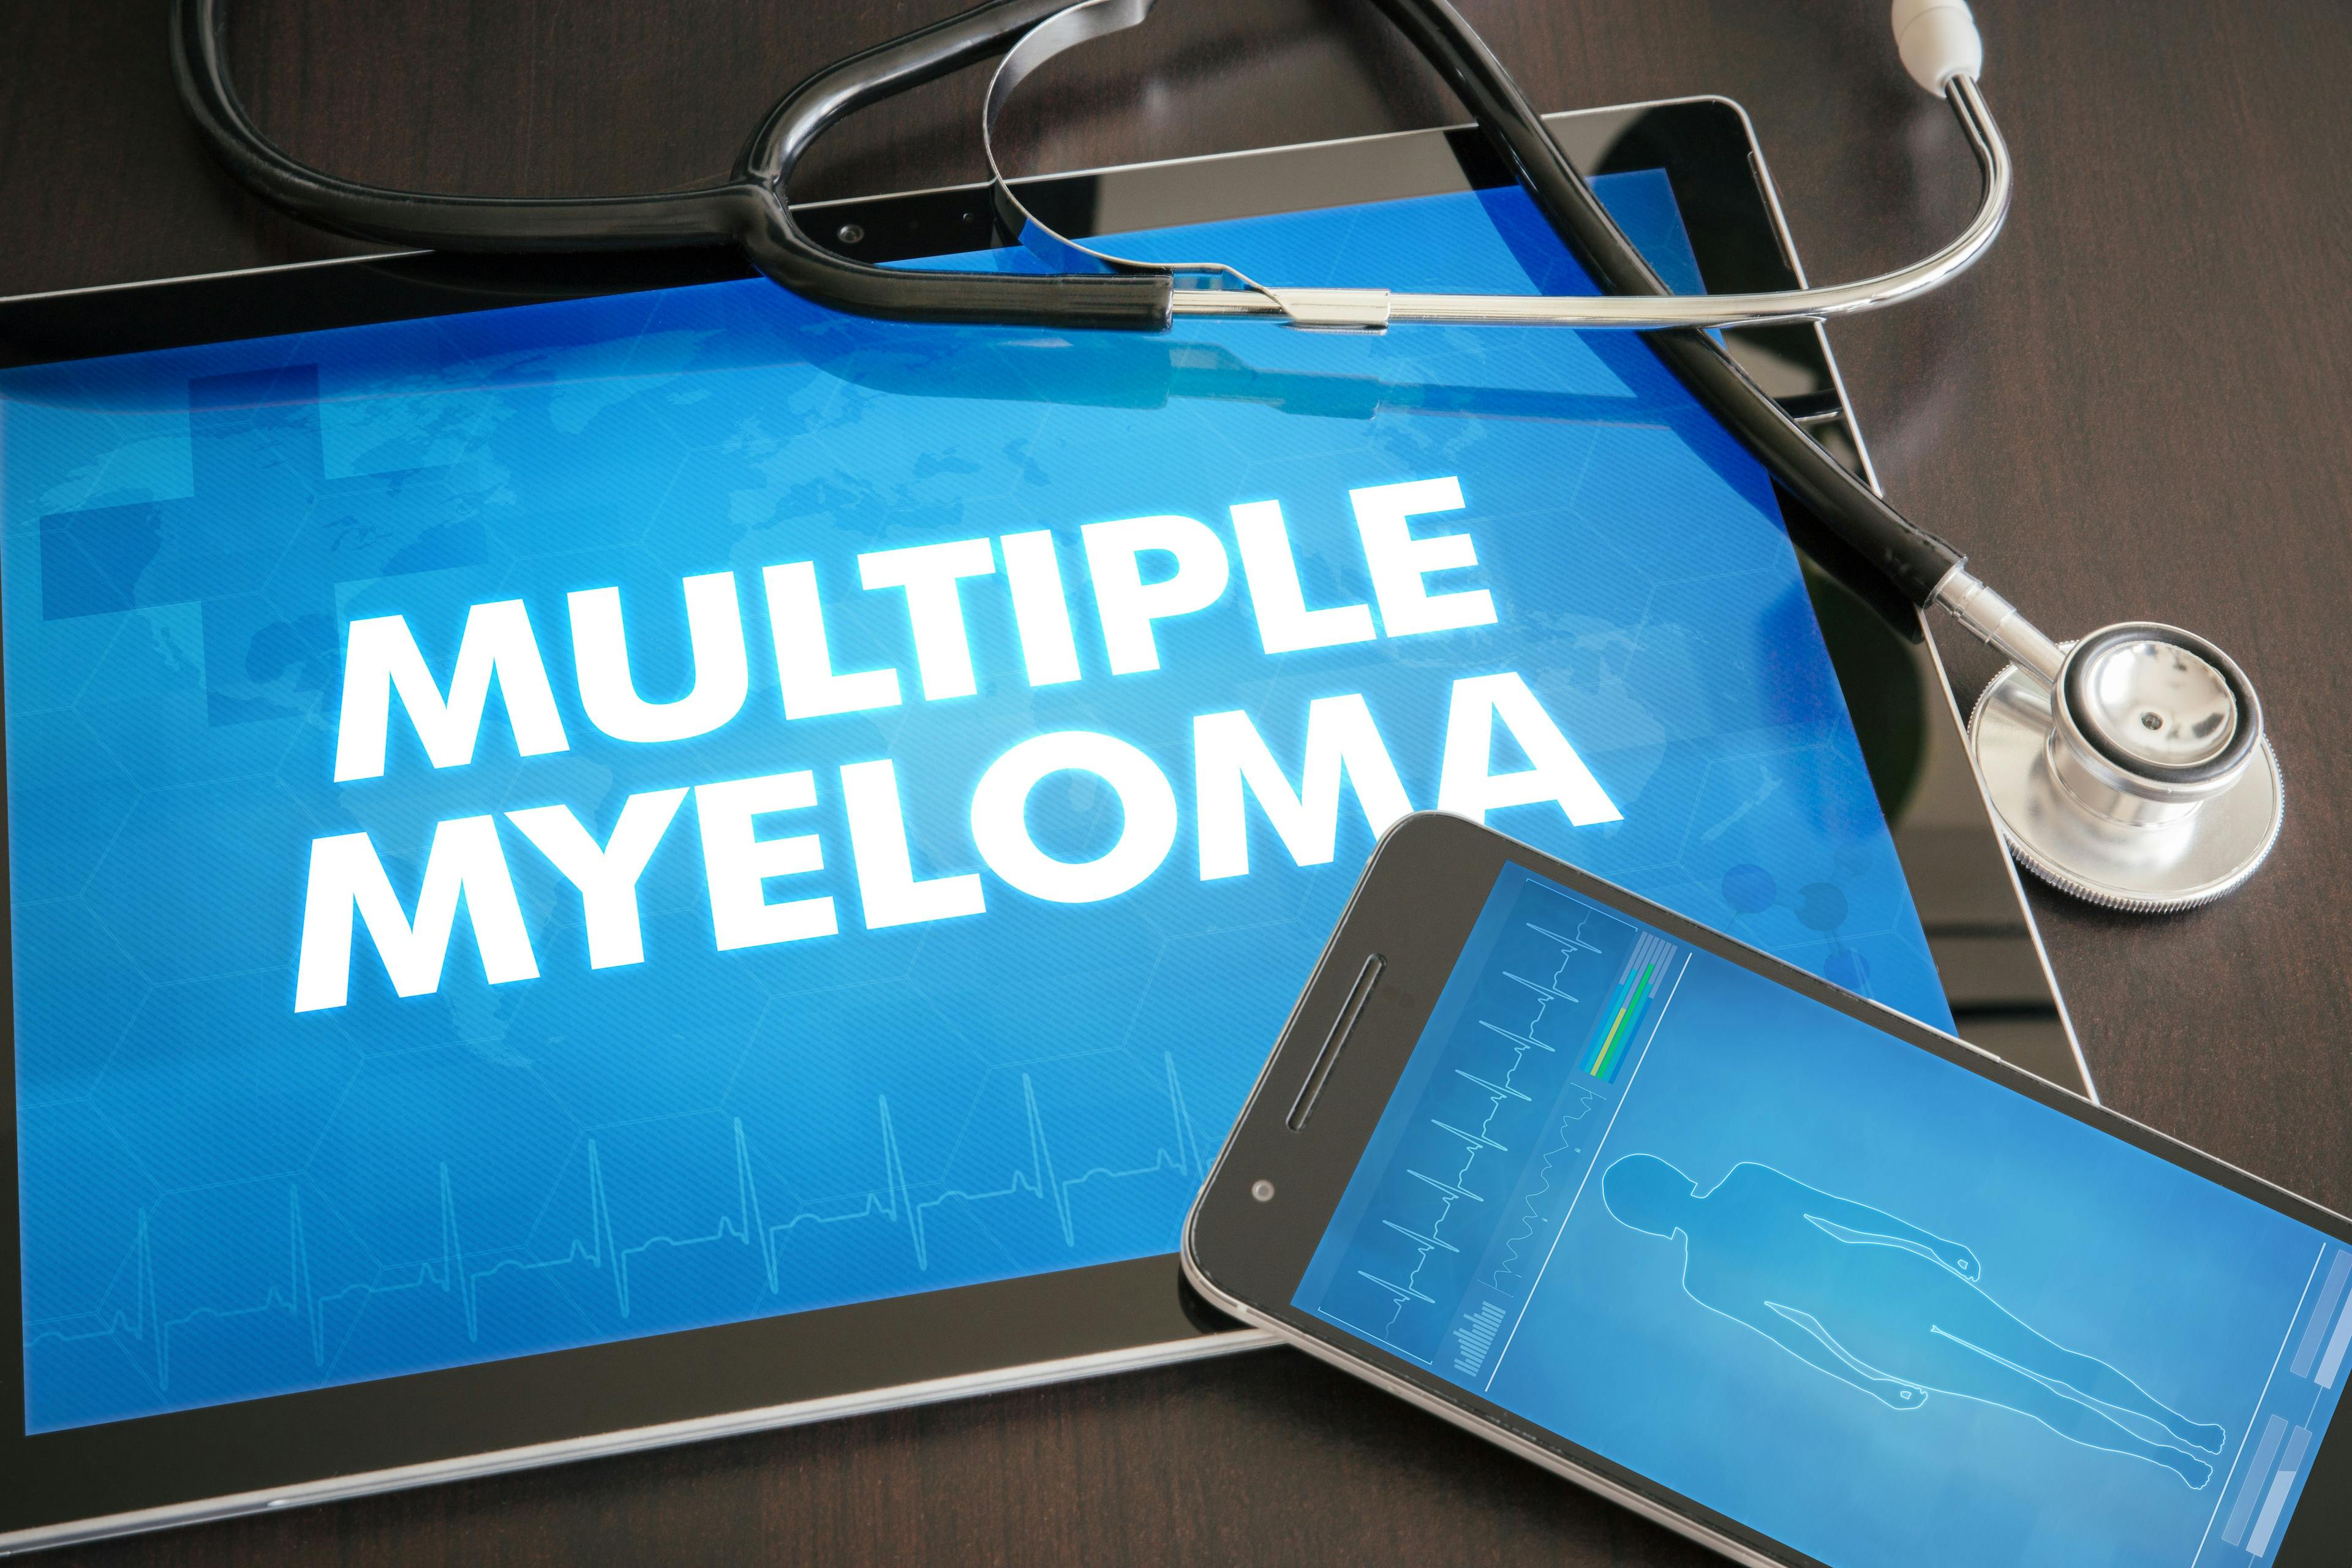 Patients With Penta-Refractory Myeloma May Benefit From BCMA-Directed Therapy